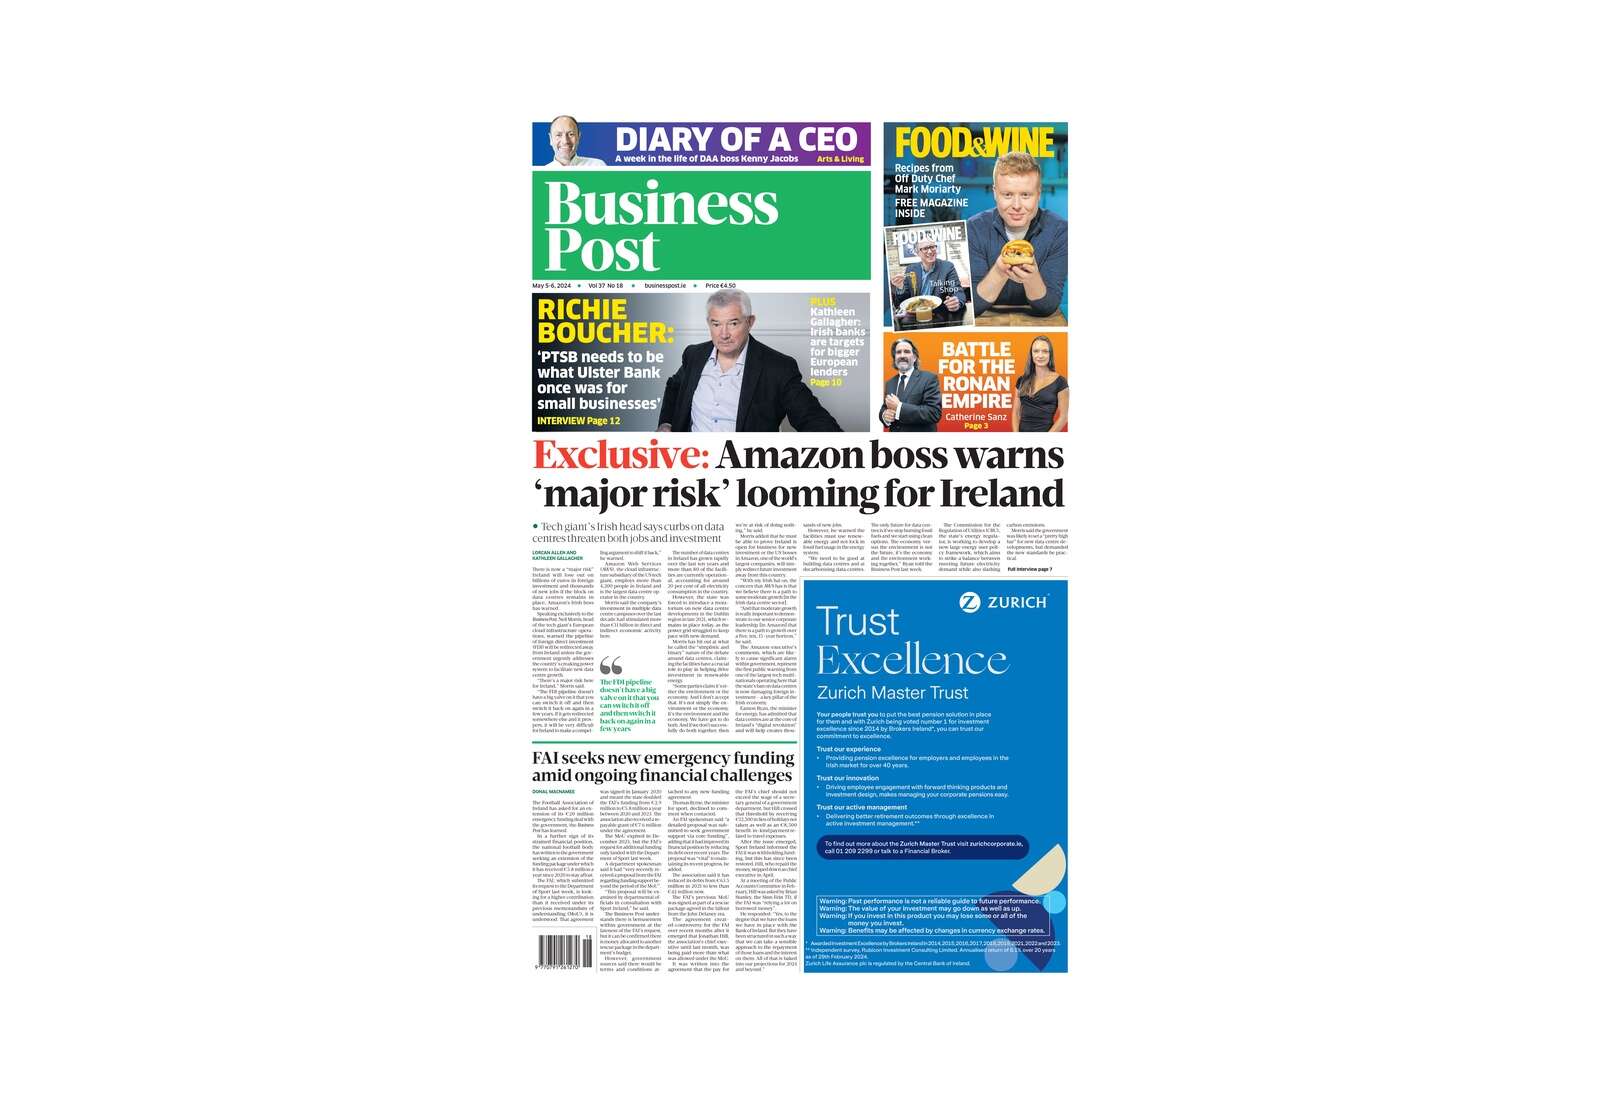 This week’s edition is packed with original stories and insightful analysis on business and politics